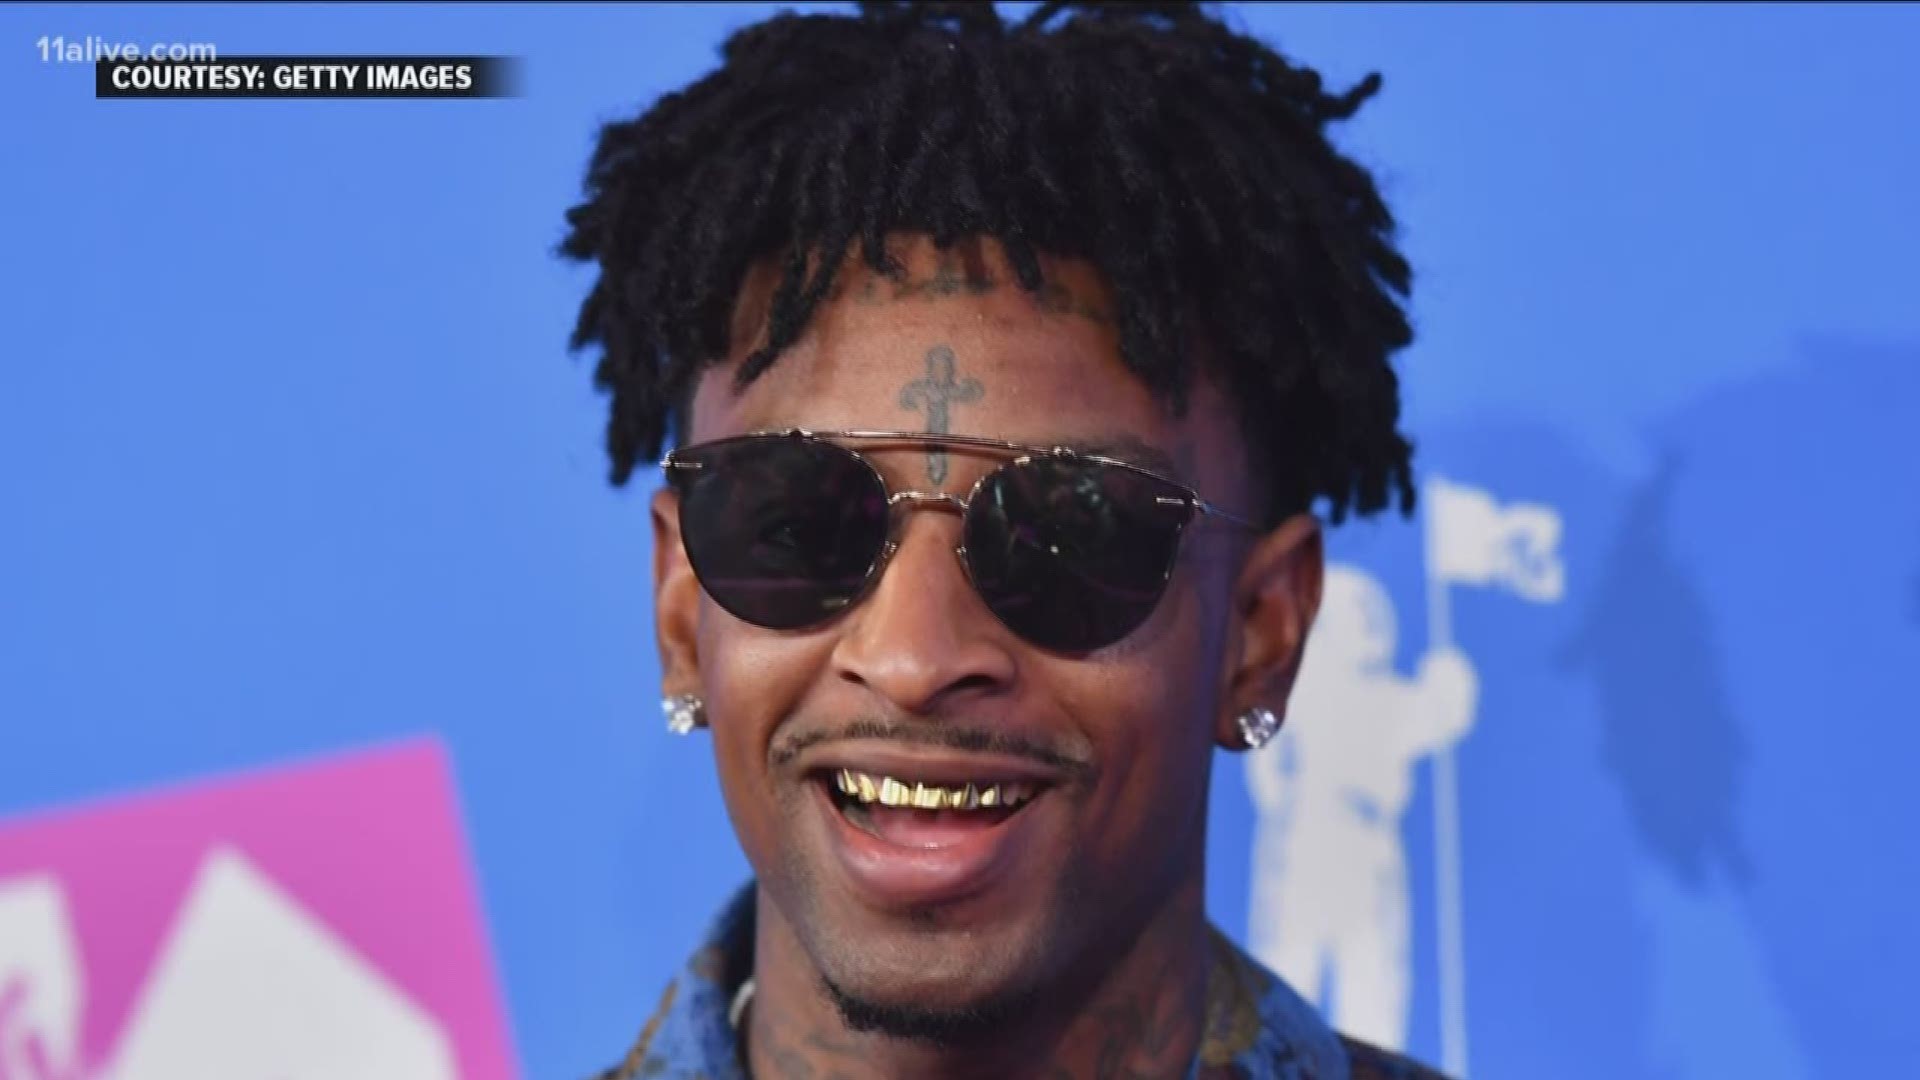 21 Savage Arrested By Ice In Atlanta 11alive Com